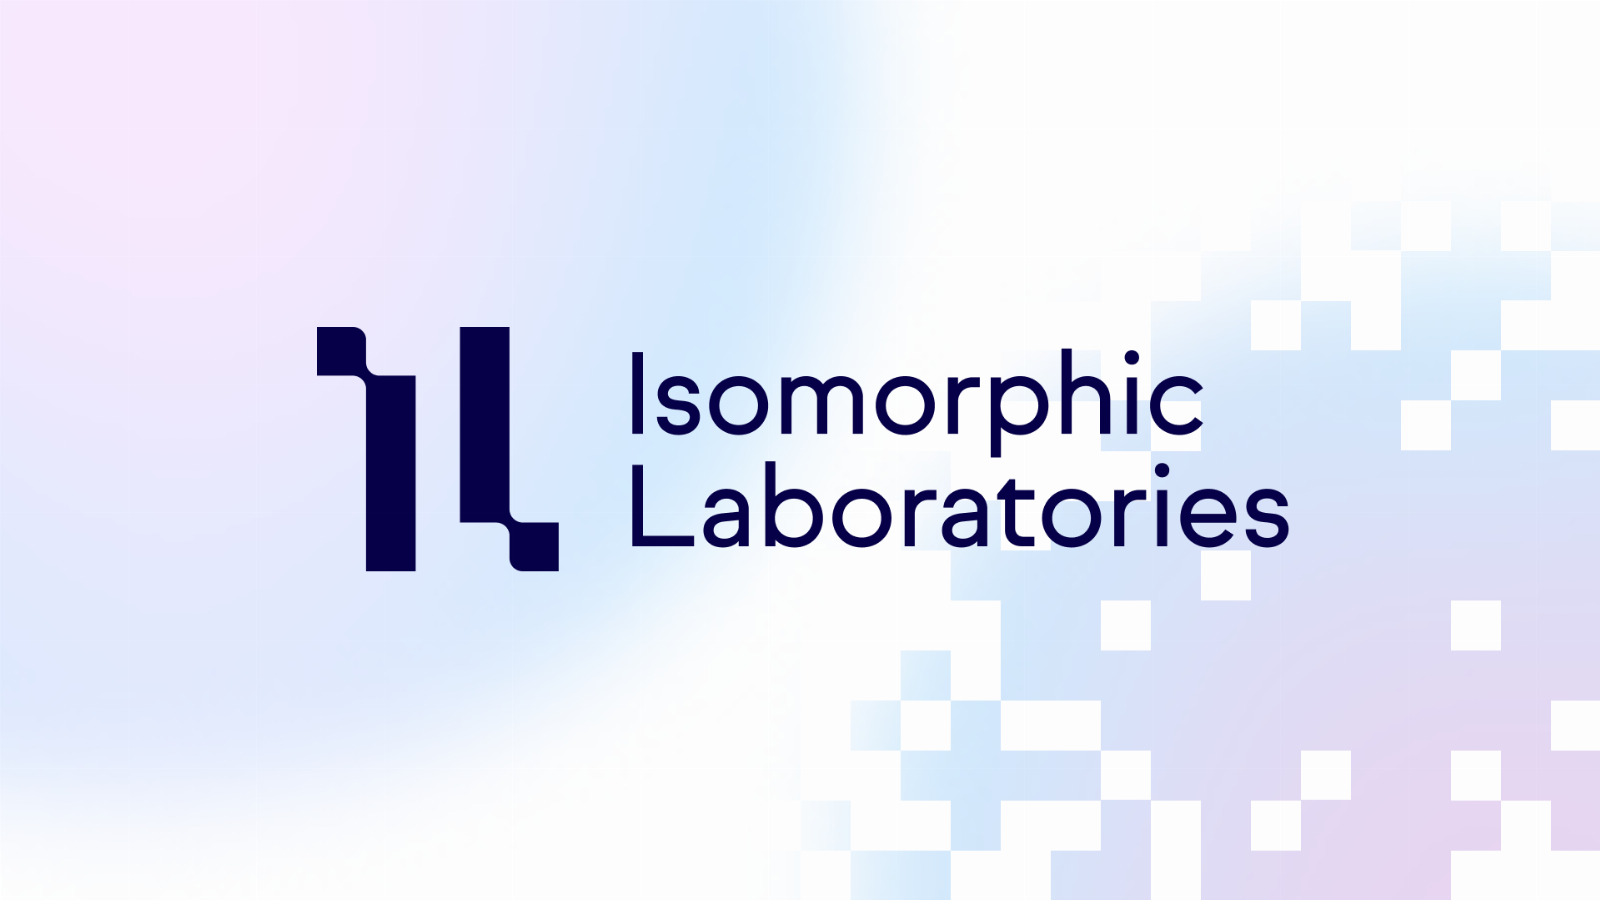 Isomorphic inks deals with Eli Lilly and Novartis for drug discovery